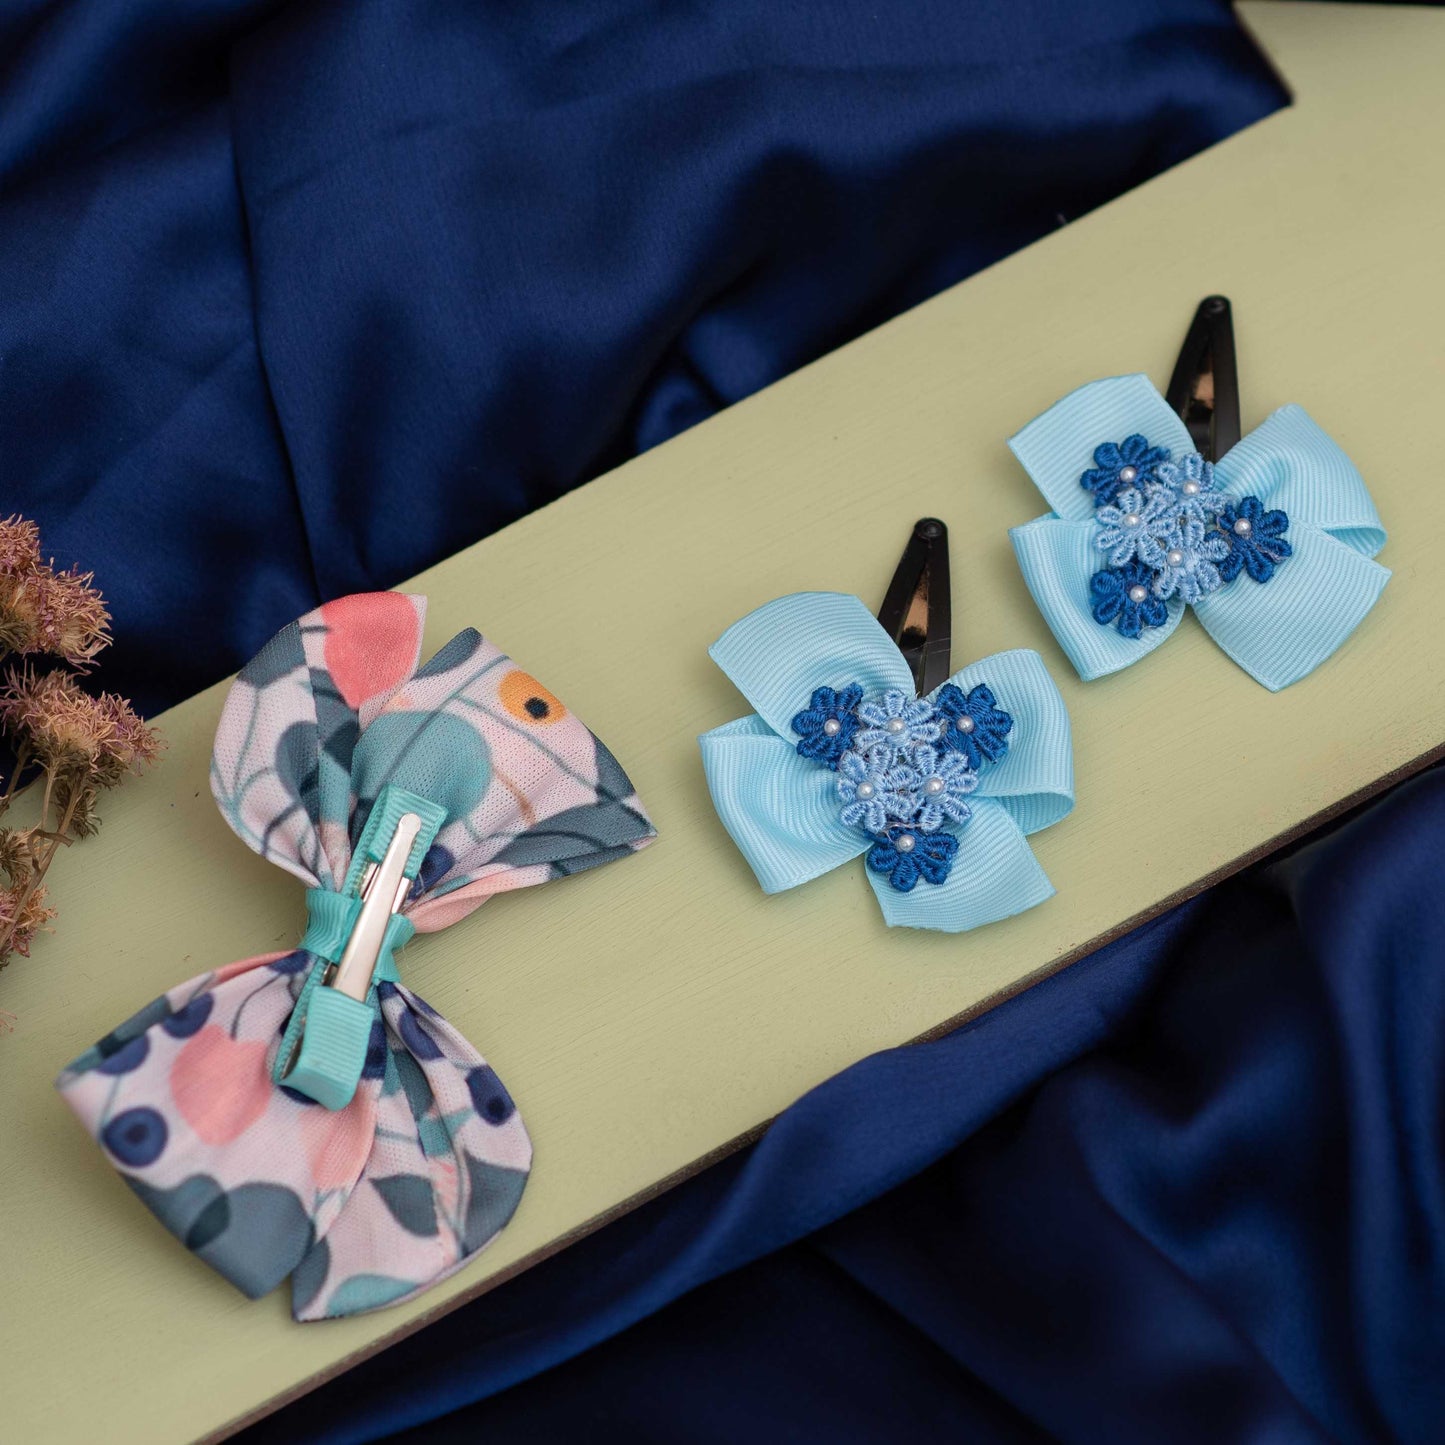 Combo: Fancy bow with felt roses and pearls on alligator clip and dual bow on tic-tac pins - Blue and White (Set of 1 pair, 1 single bow - 3 quantity)